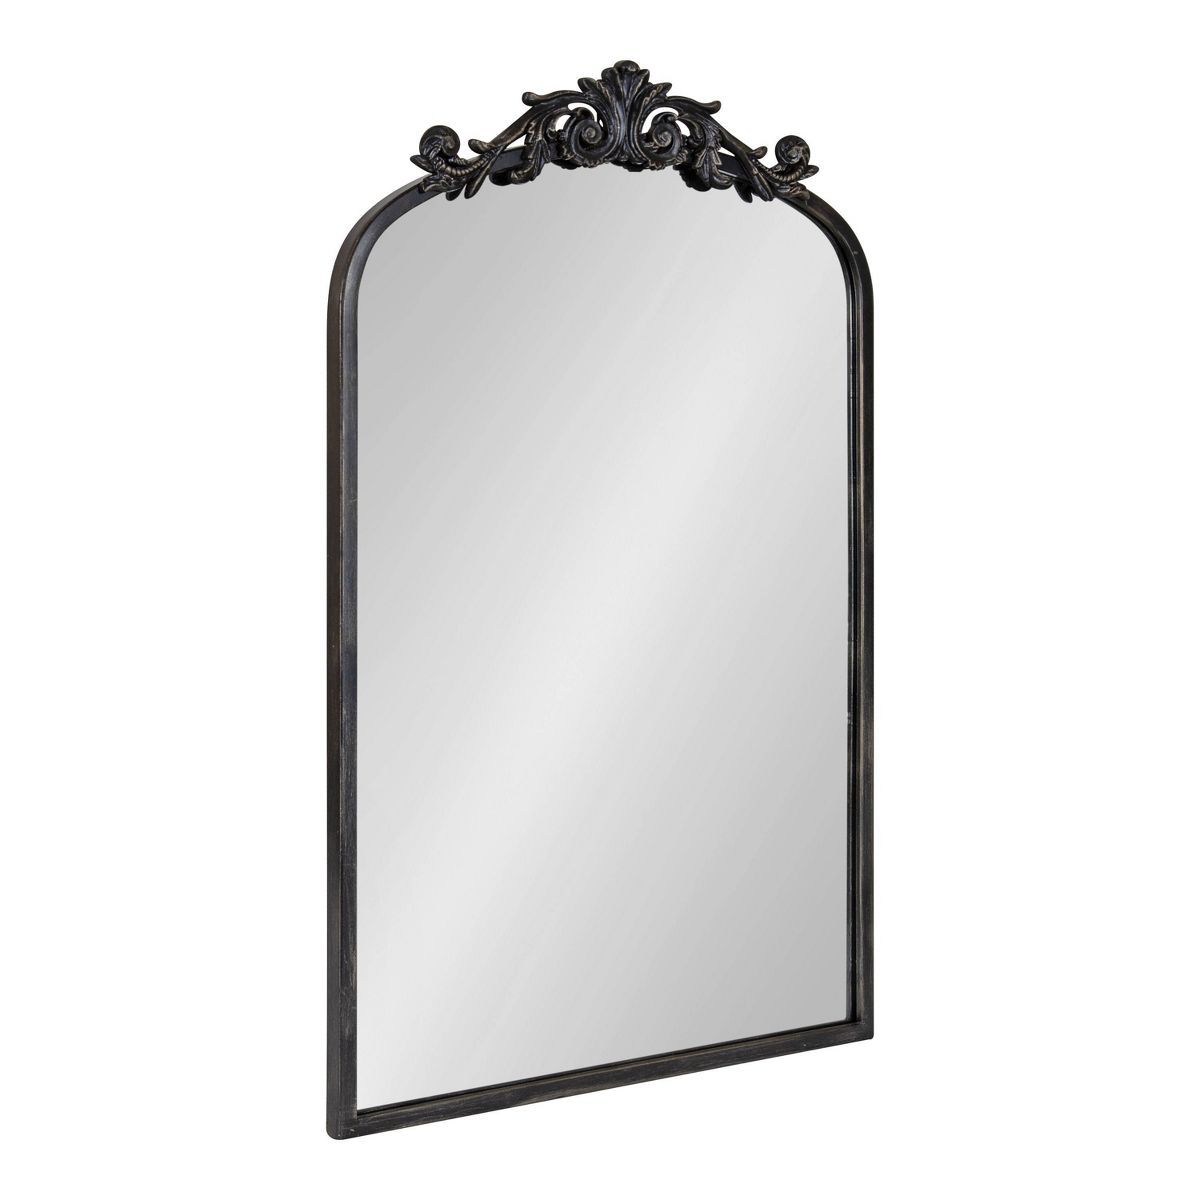 19" x 30.7" Arendahl Arch Wall Mirror Black - Kate & Laurel All Things Decor | Target